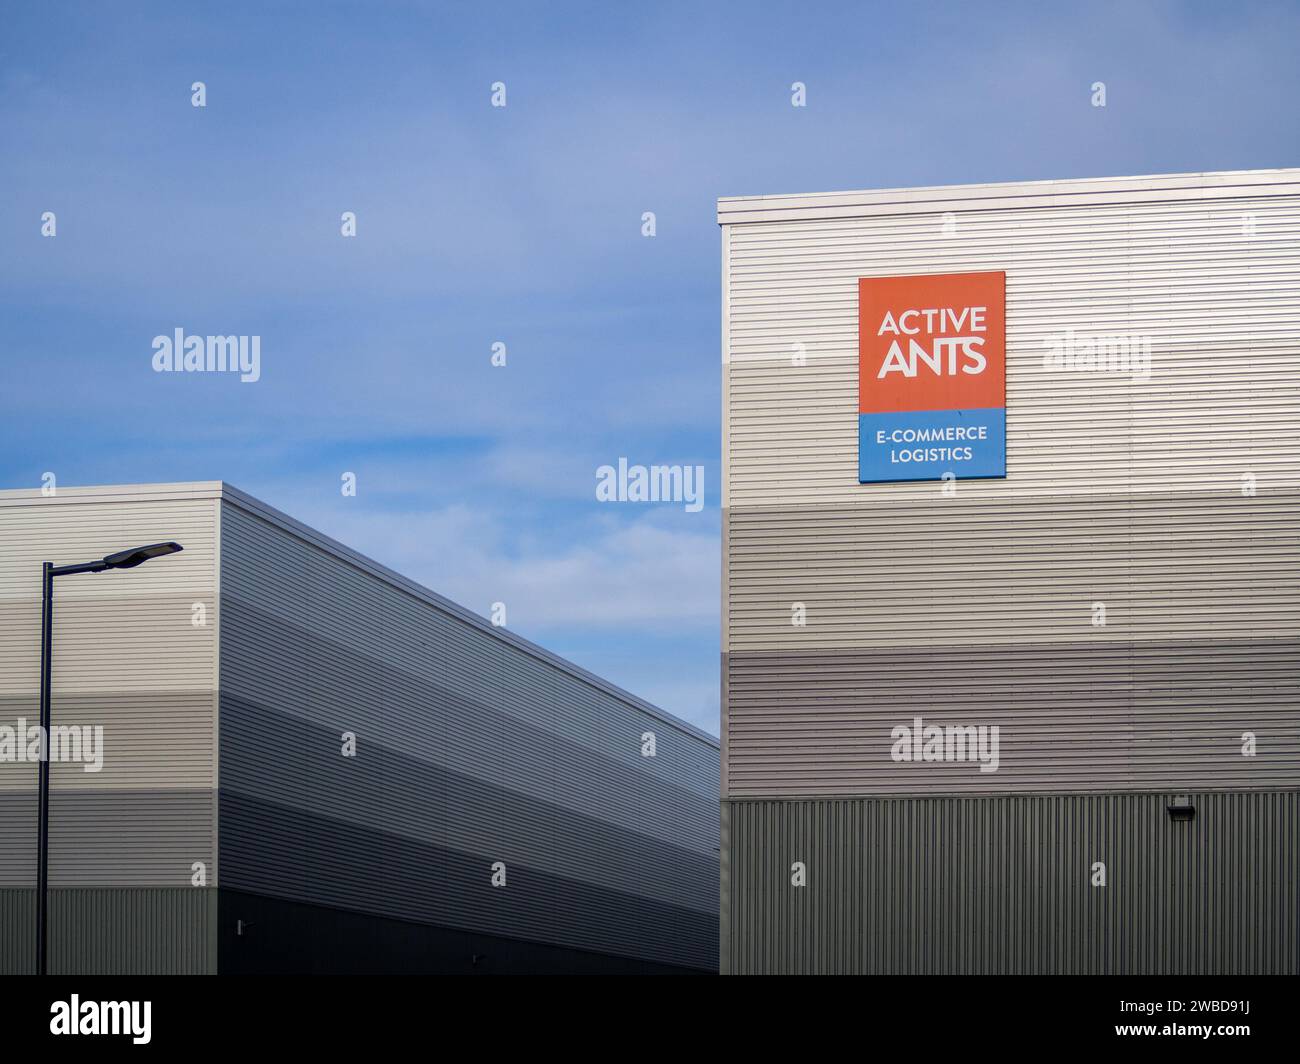 Warehouses and signage for Active ANTS, an E-fulfilment centre, Brackmills Industrial Estate, Northampton, UK Stock Photo